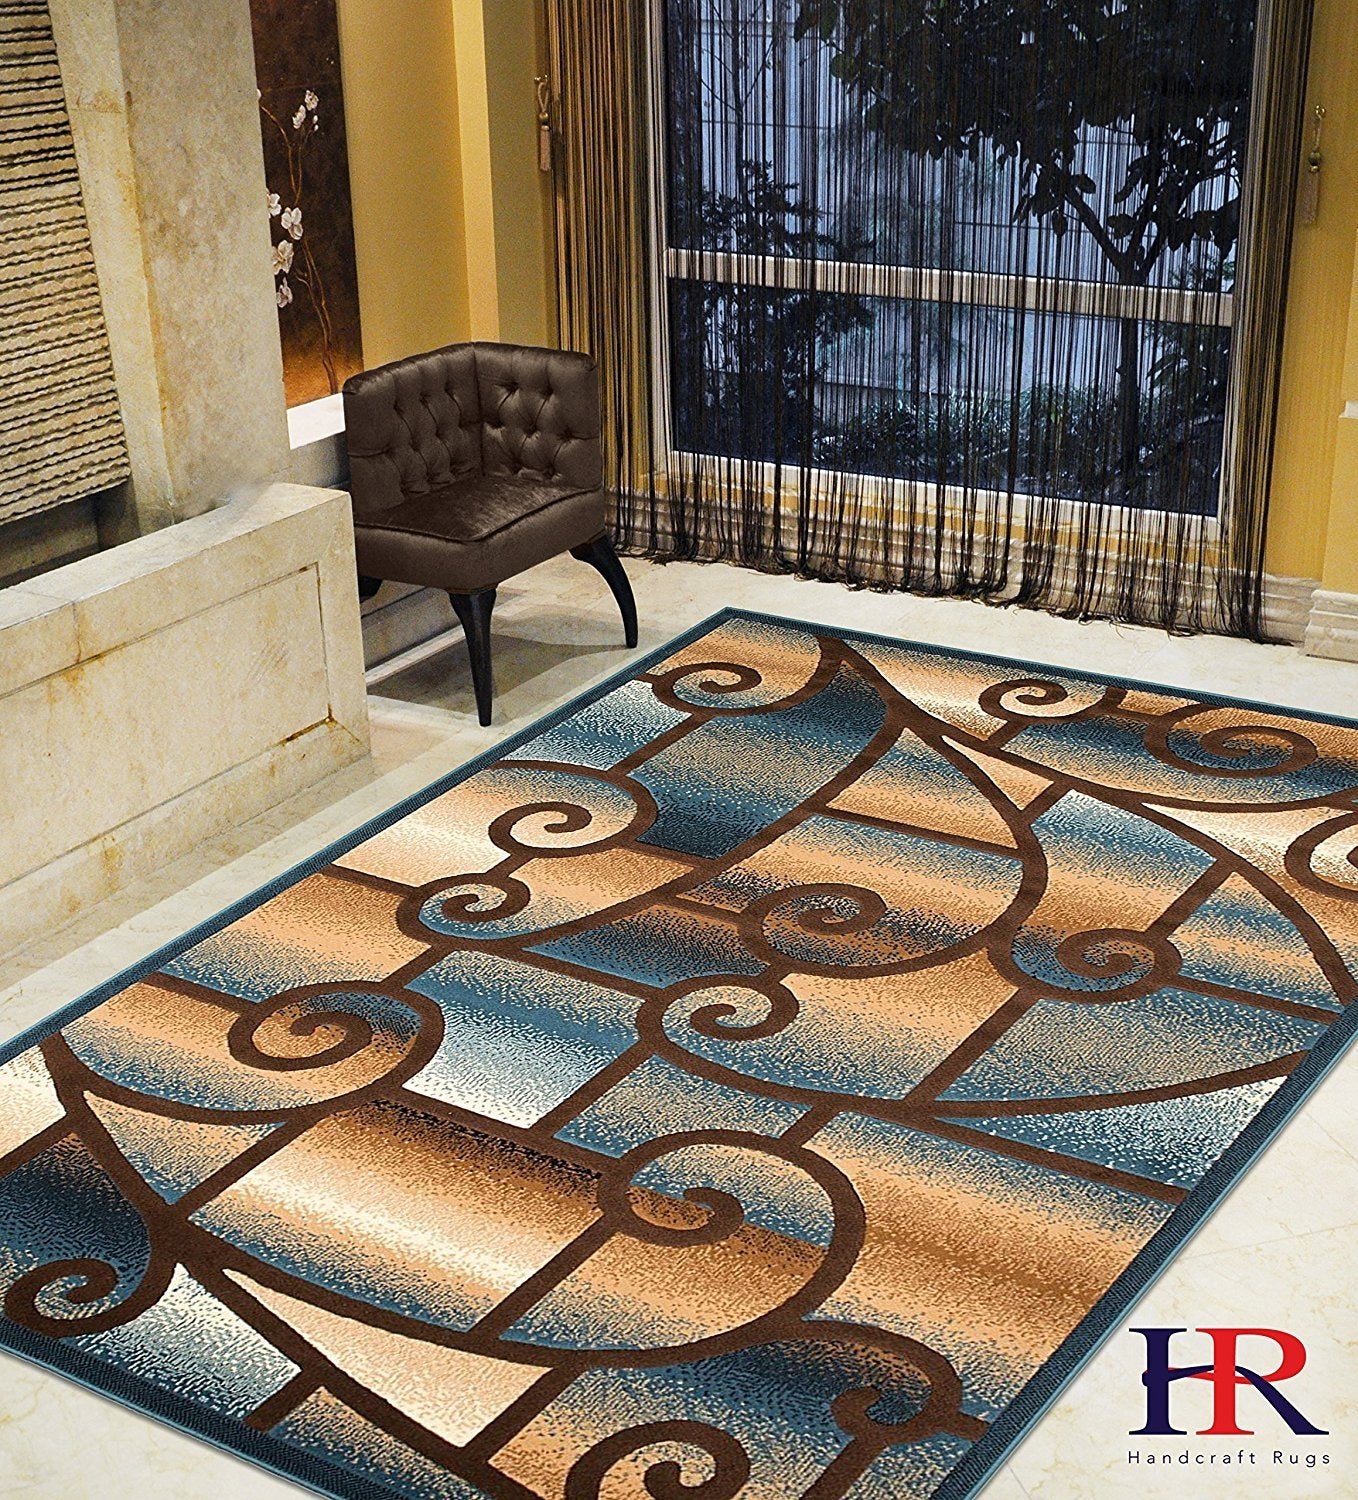 HR-Modern Living Room Rugs-Abstract Carpet with Geometric Swirls Pattern-Blue/Beige/Ivory/Chocolate (1'96"x 3'3")